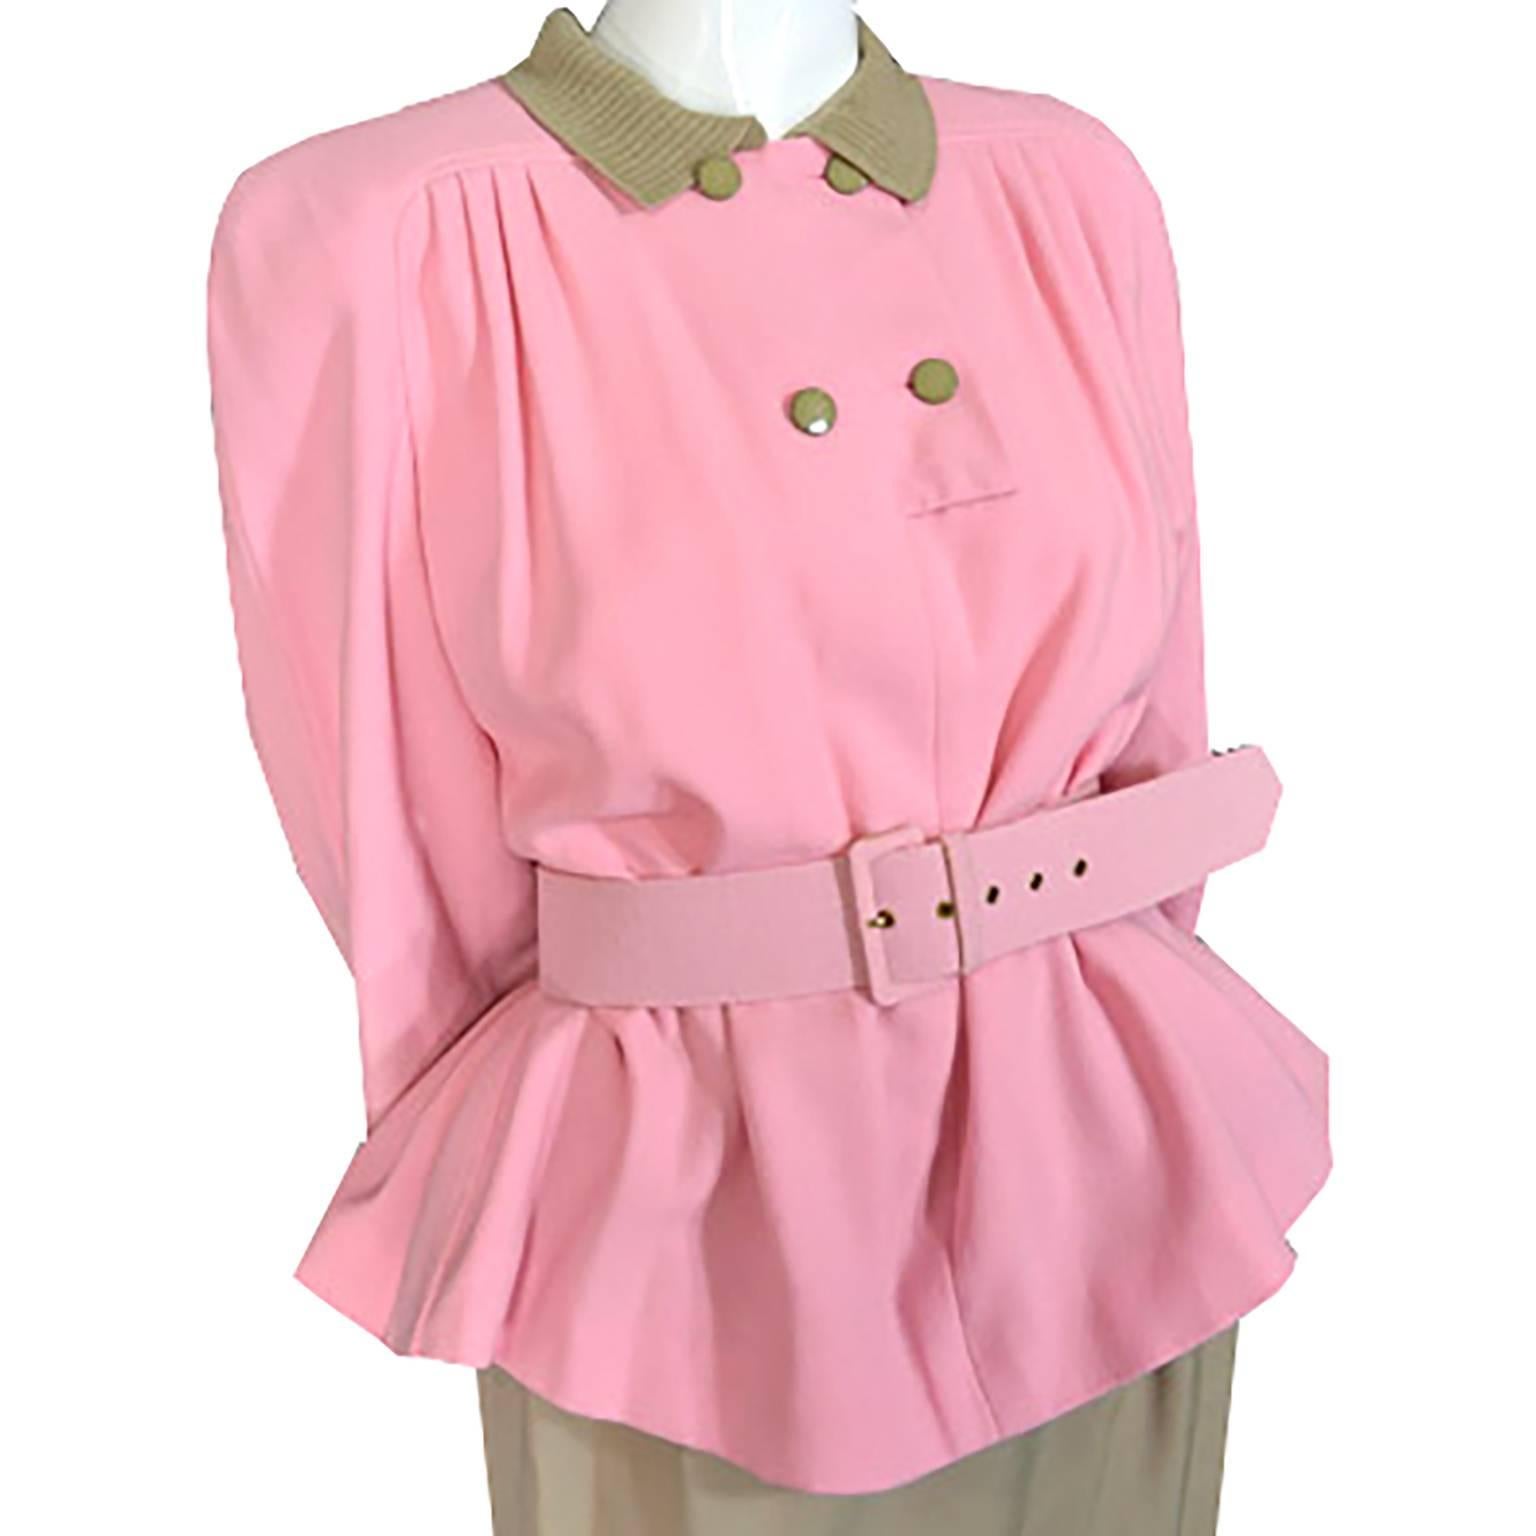 1984 Runway Vintage Valentino Boutique 2pc Skirt Top Outfit Pink & Camel Size 8 4